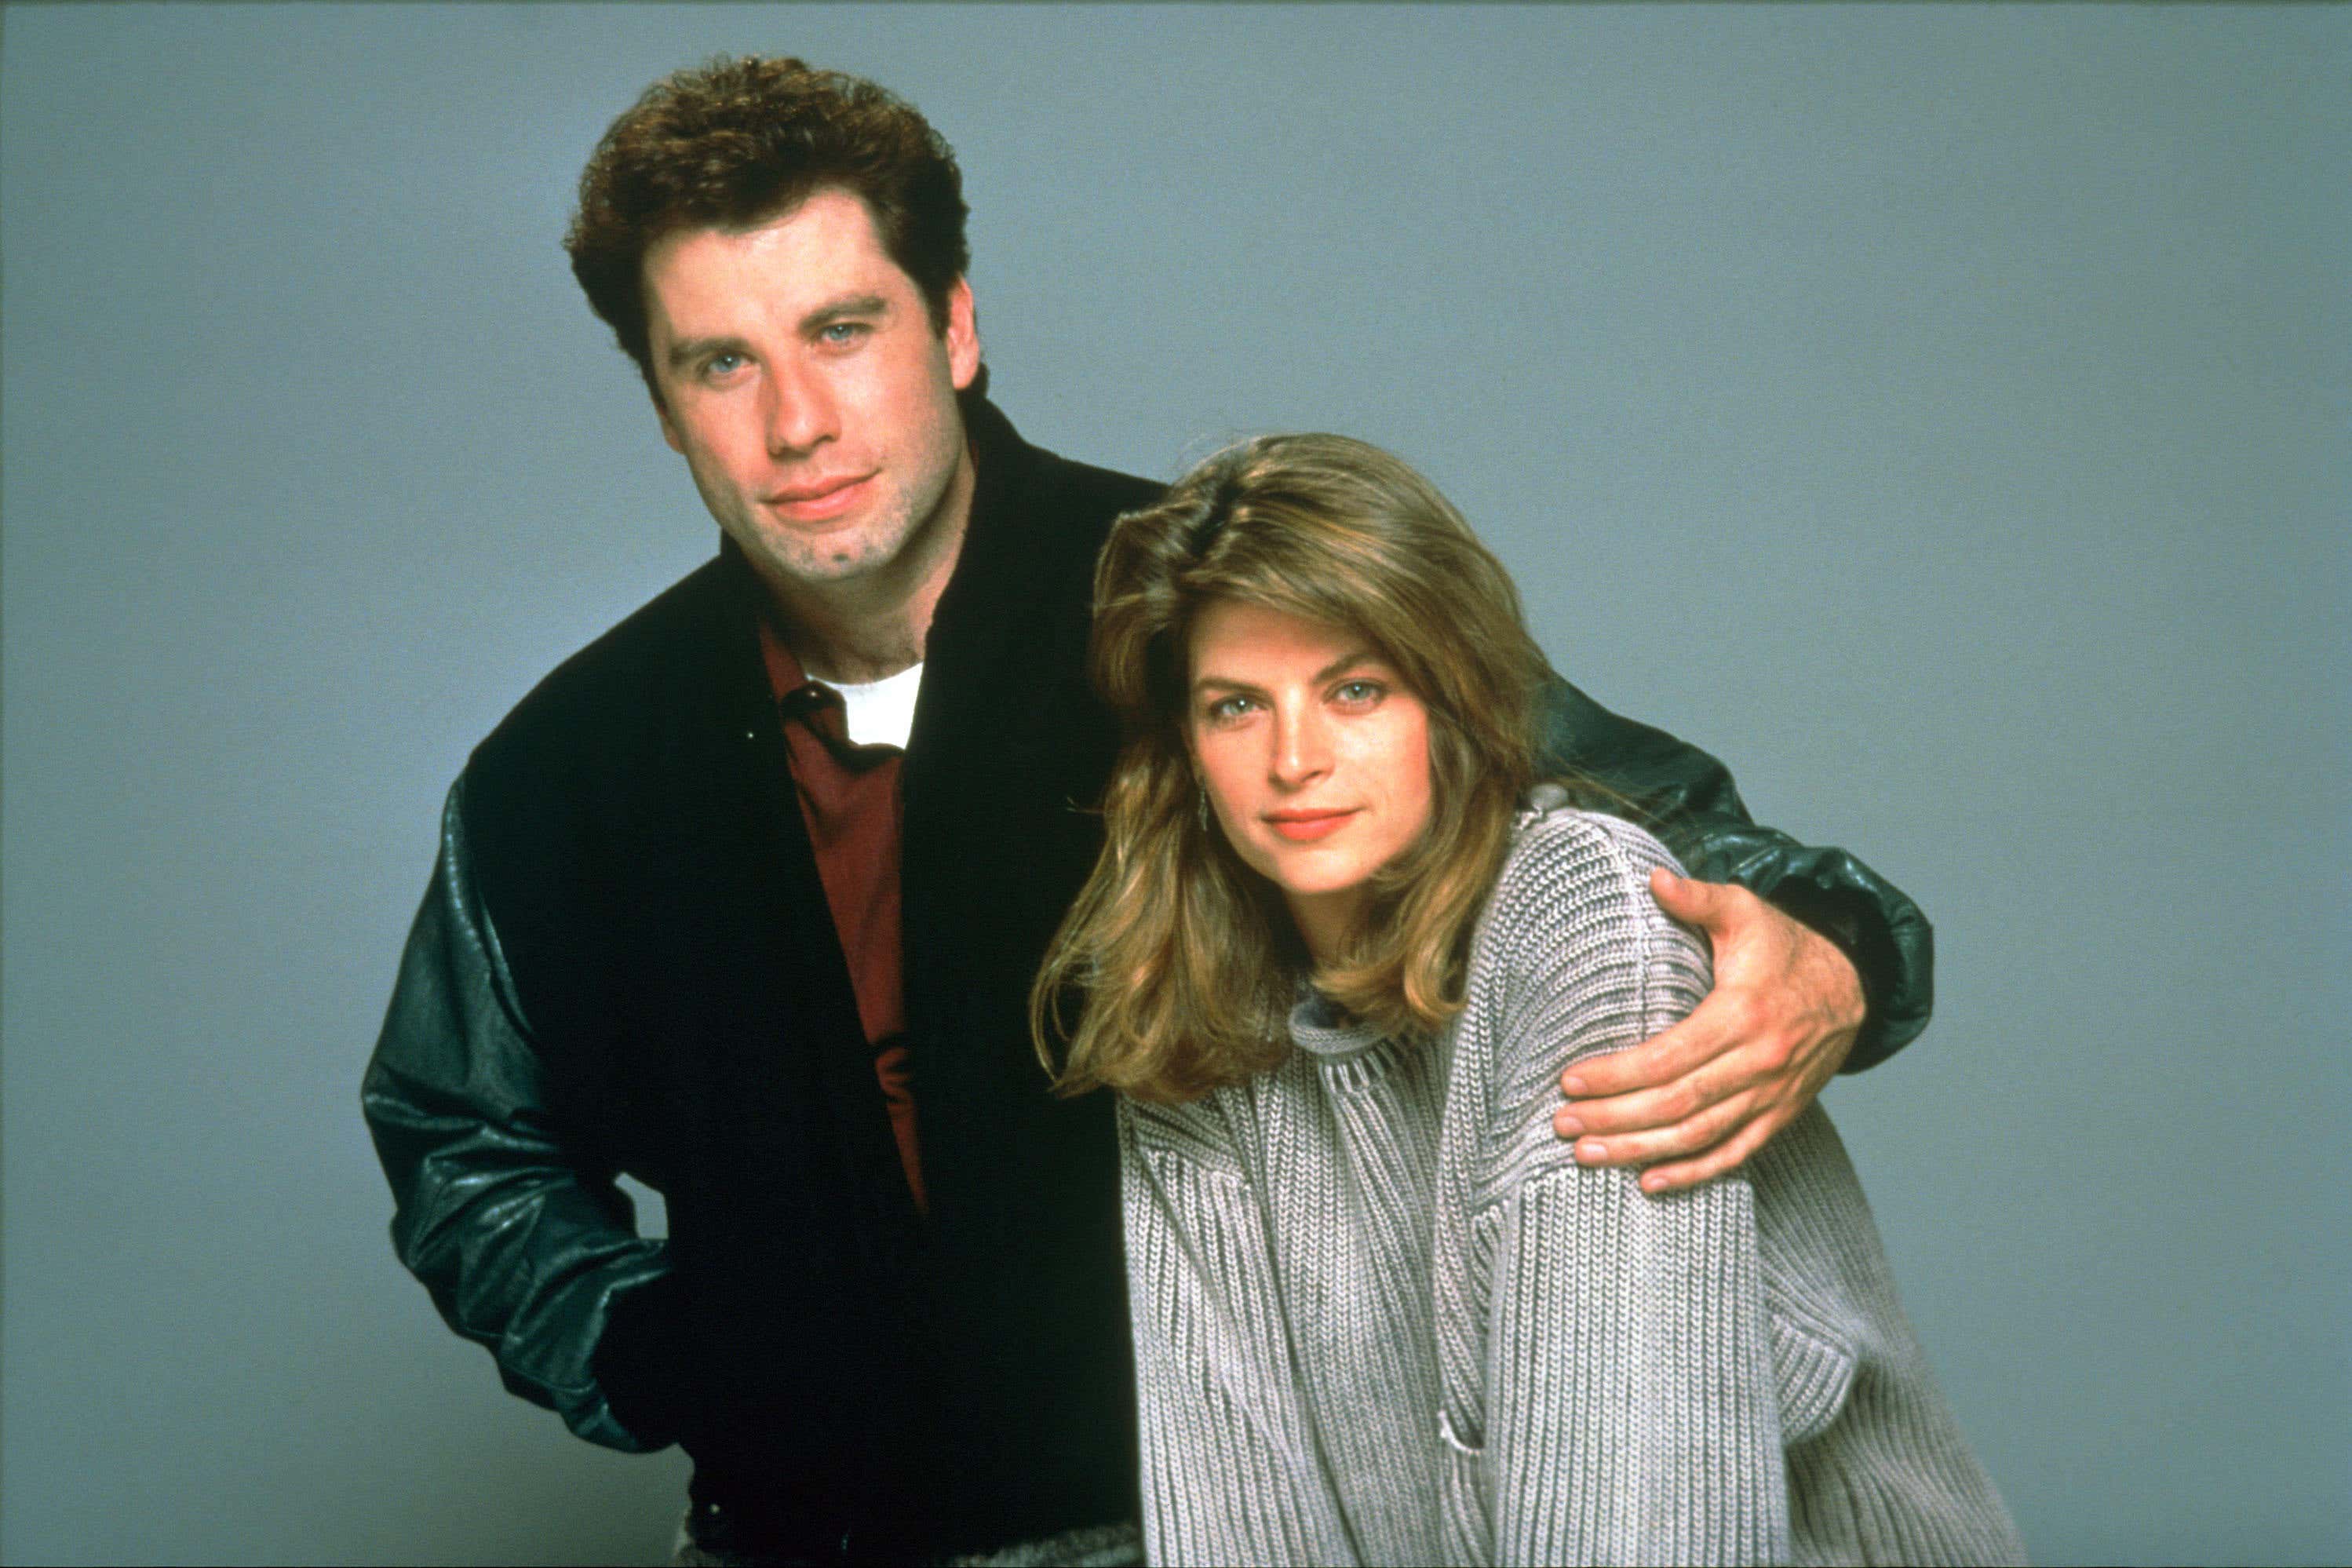 John Travolta has remembered actress Kirstie Alley following her death from cancer at the age of 71 (PA)